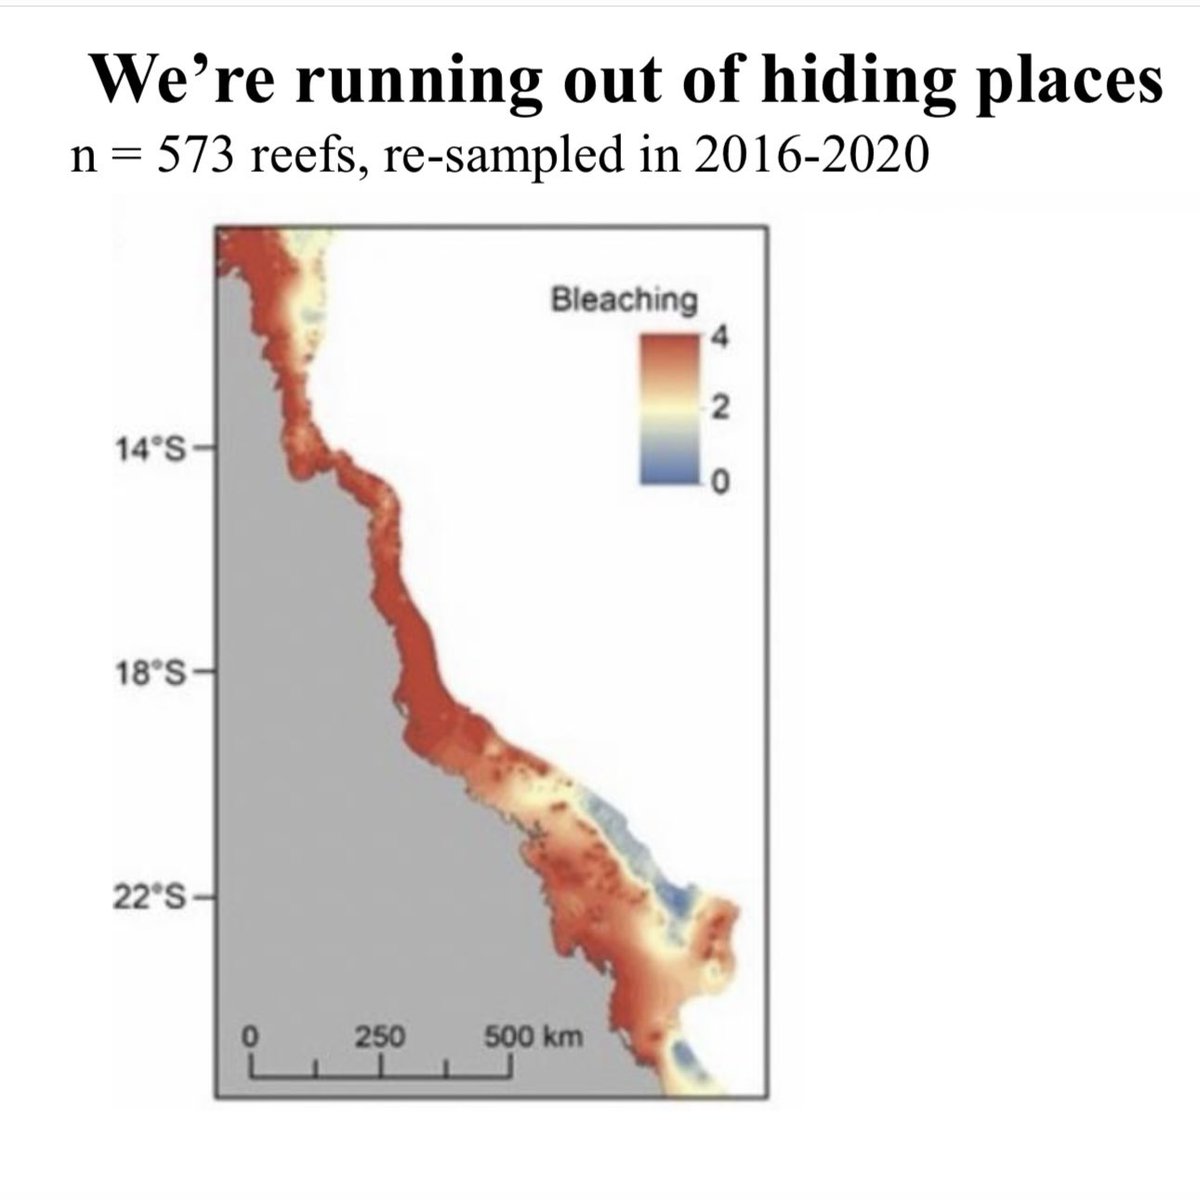 Red regions of the Great Barrier Reef experienced mass bleaching and mortality of corals at least once in 2016, 2017 & 2020 - leaving a blue “refuge” in the offshore south. Tragically, in 2024 the southern refuge is gone (link below)